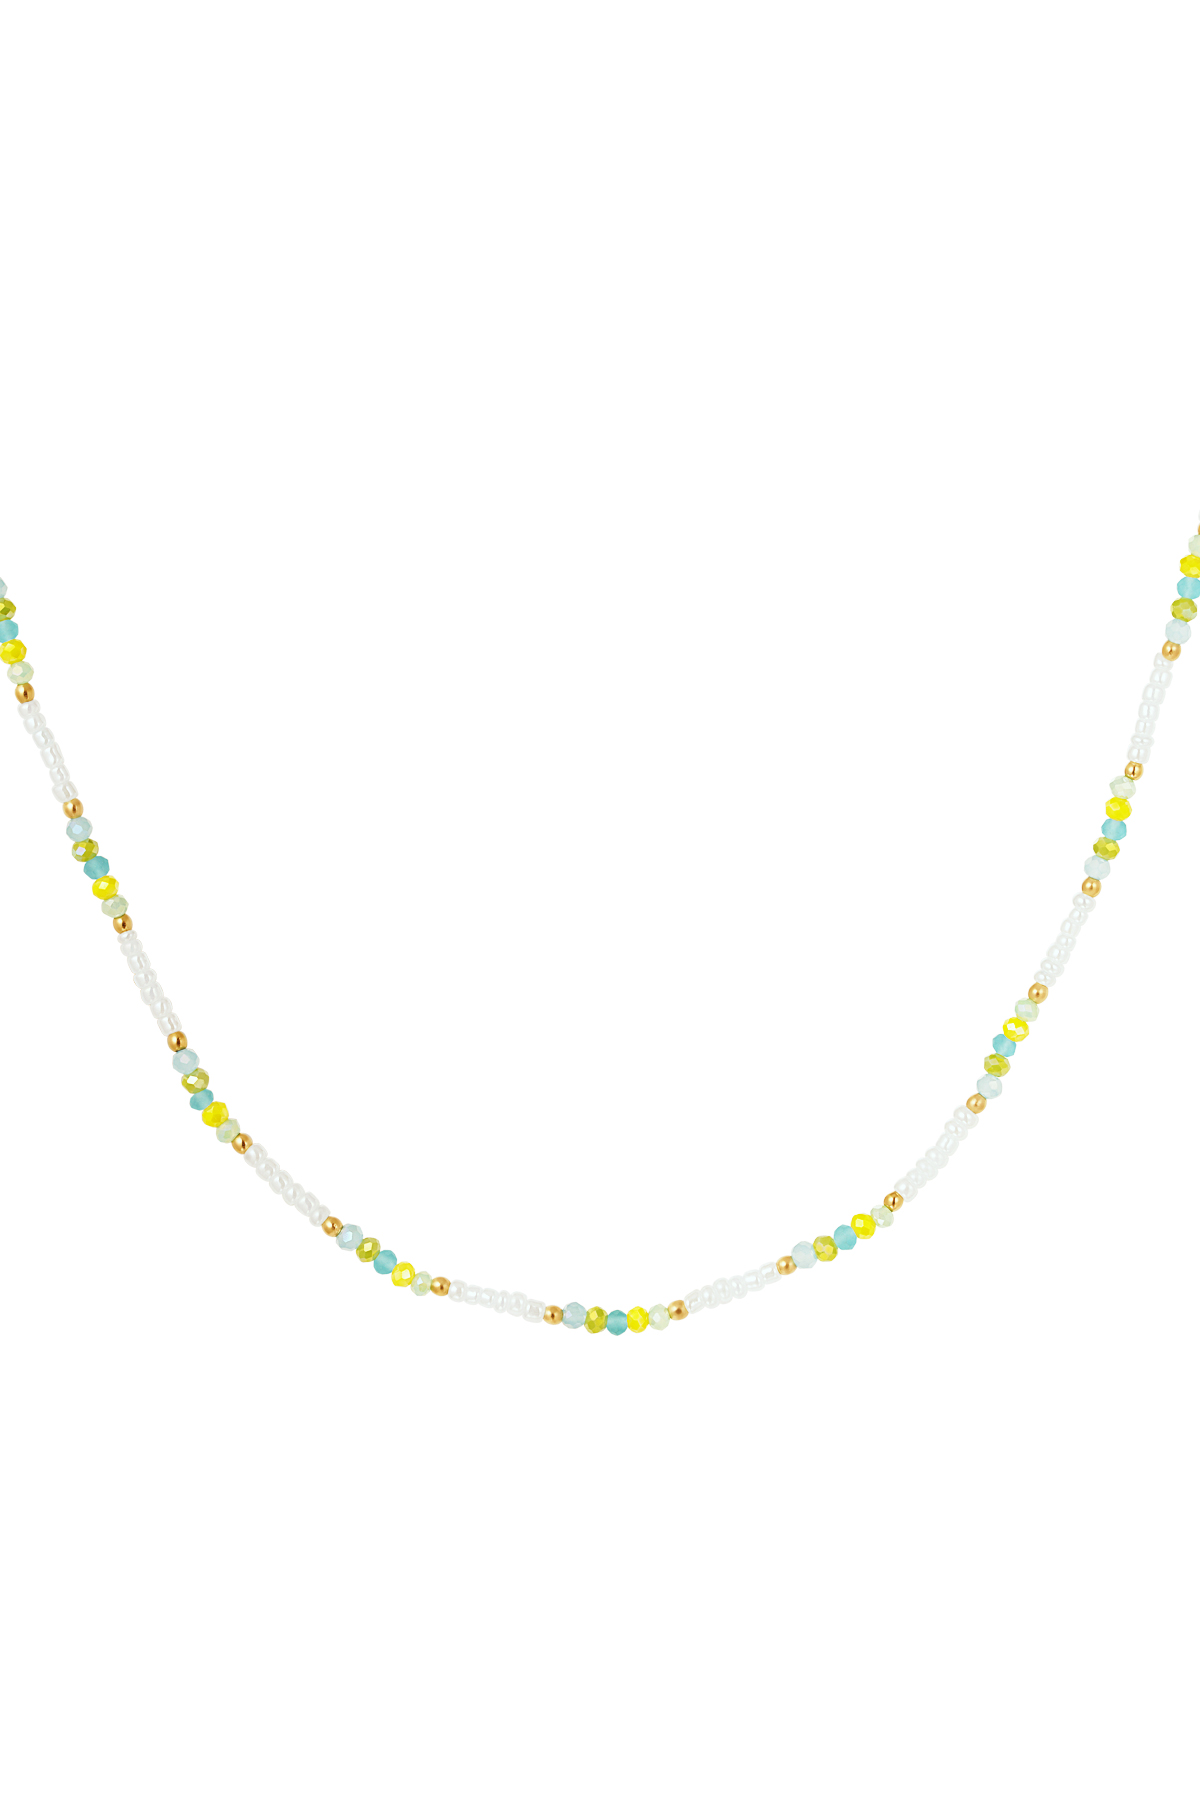 Necklace beads gold detail - white/multi h5 